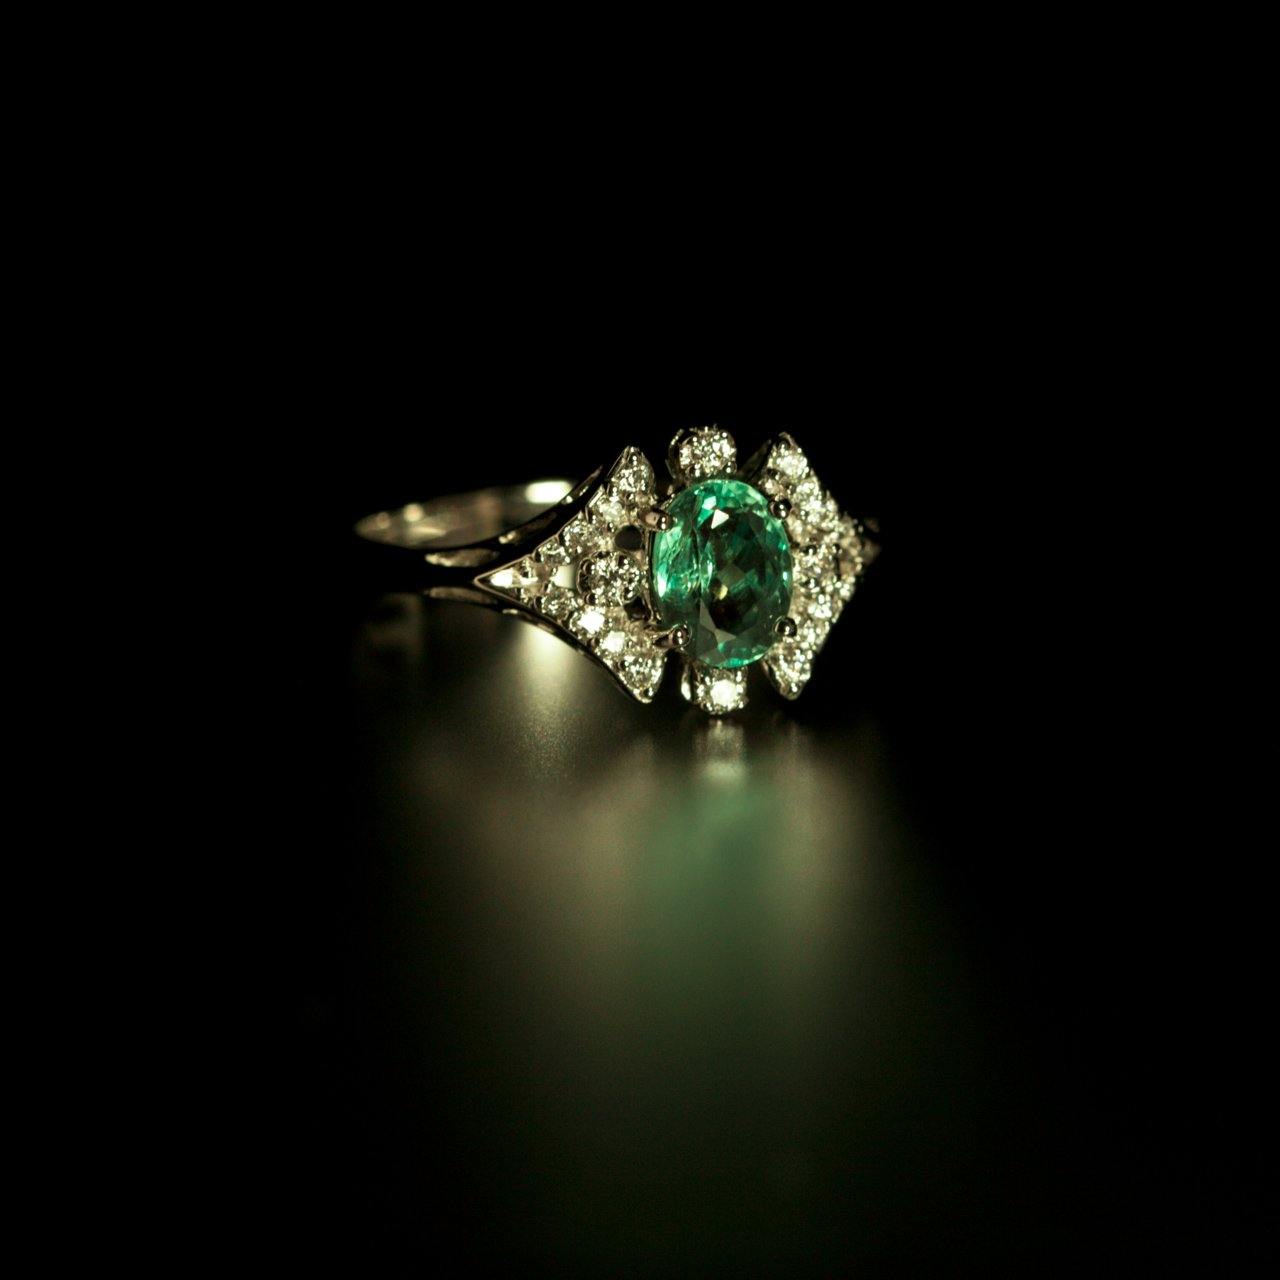 0.68ct natural alexandrite and 18k white gold ring displayed against a dark backdrop